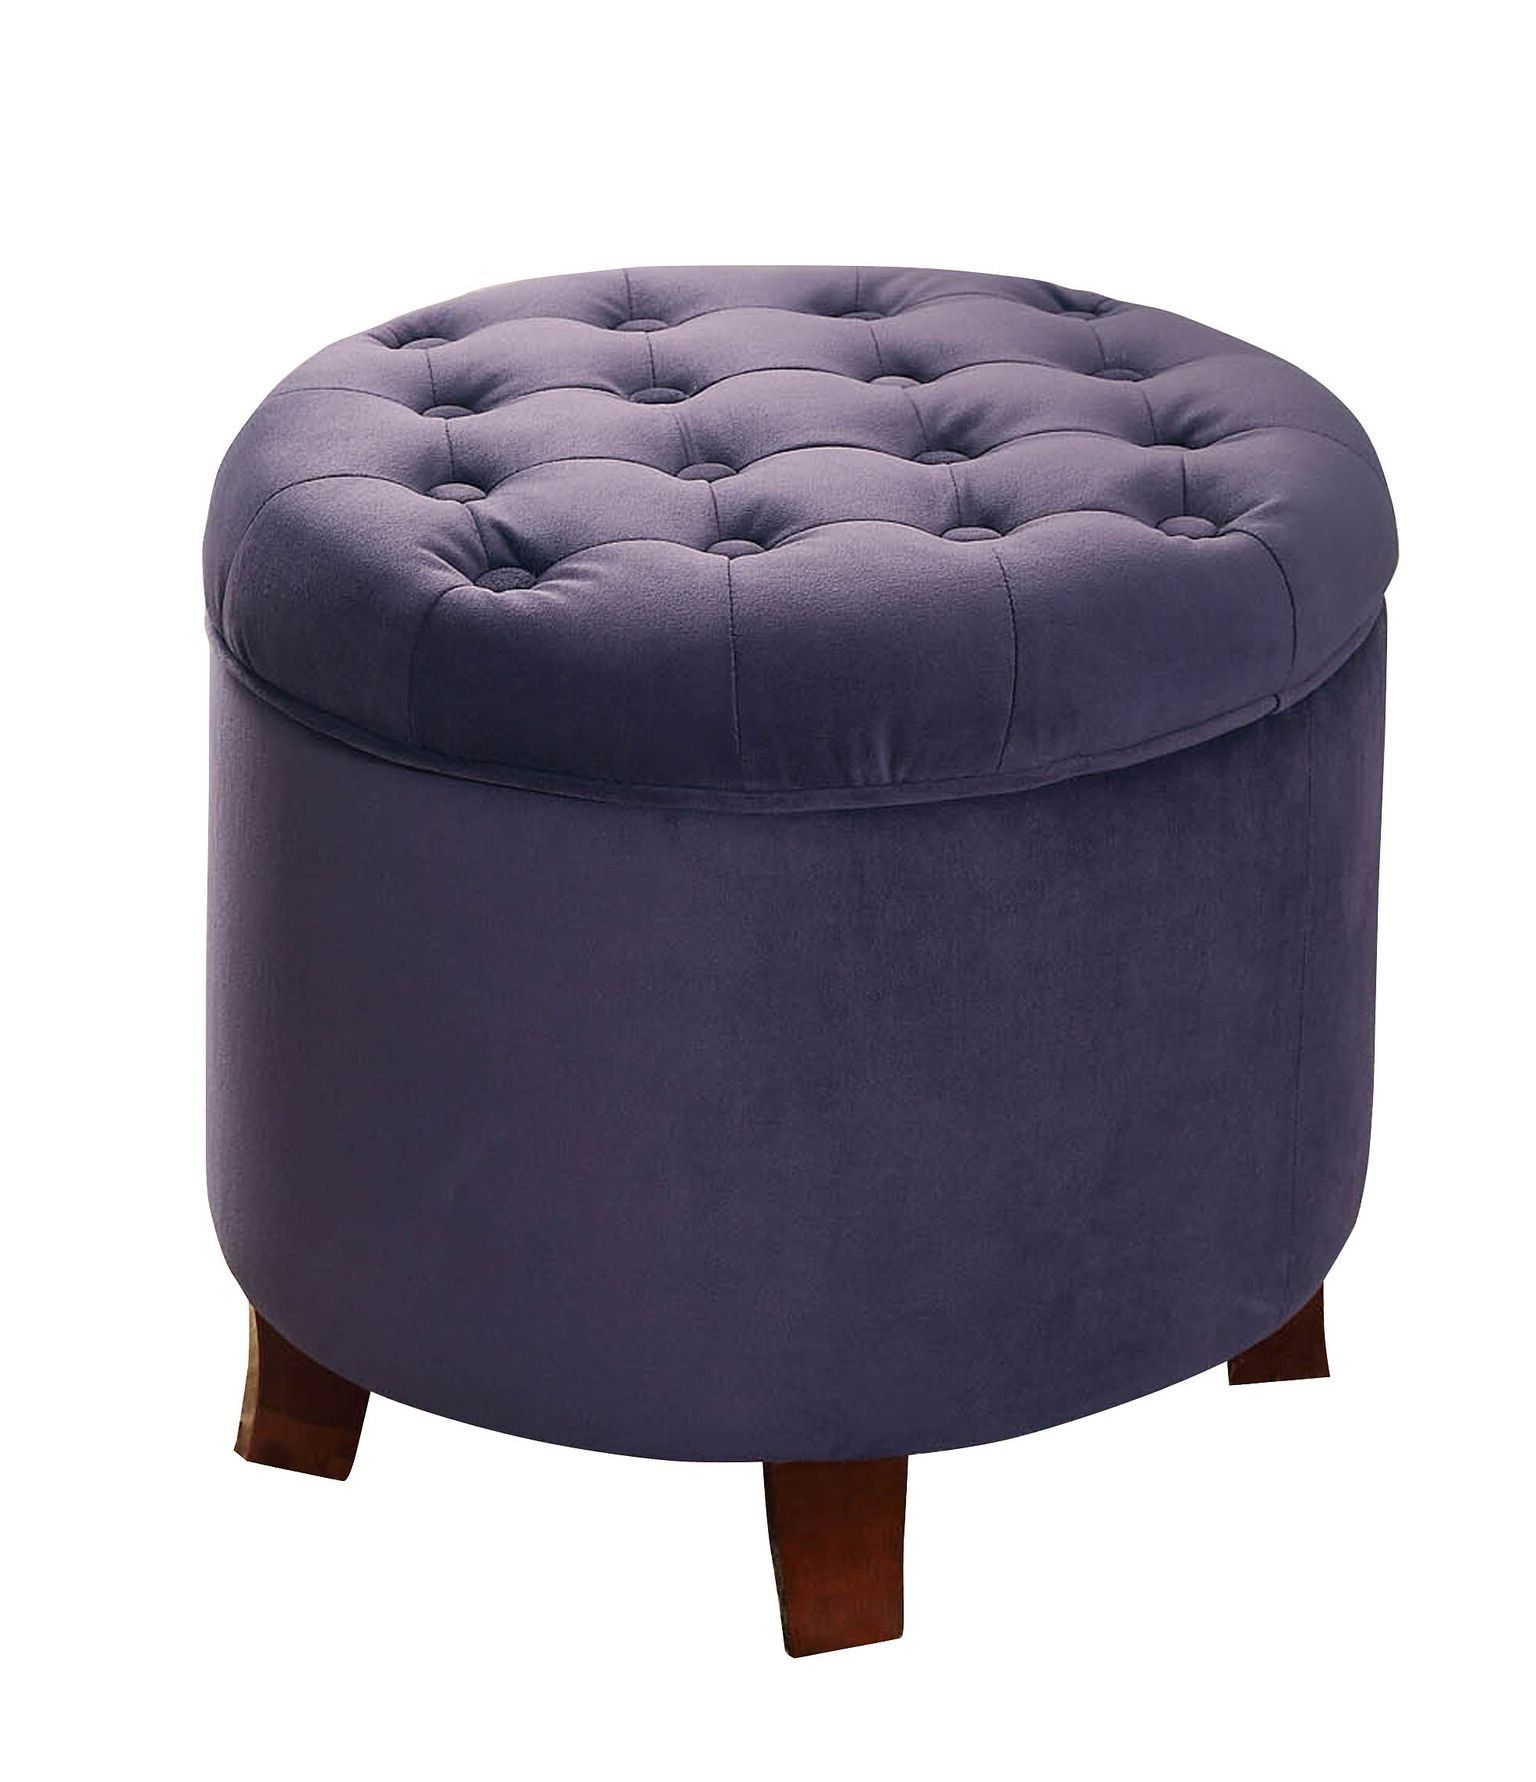 Homepop Velvet Tufted Round Storage Ottoman With Removable Lid, Purple With Regard To Best And Newest Velvet Tufted Storage Ottomans (View 3 of 10)